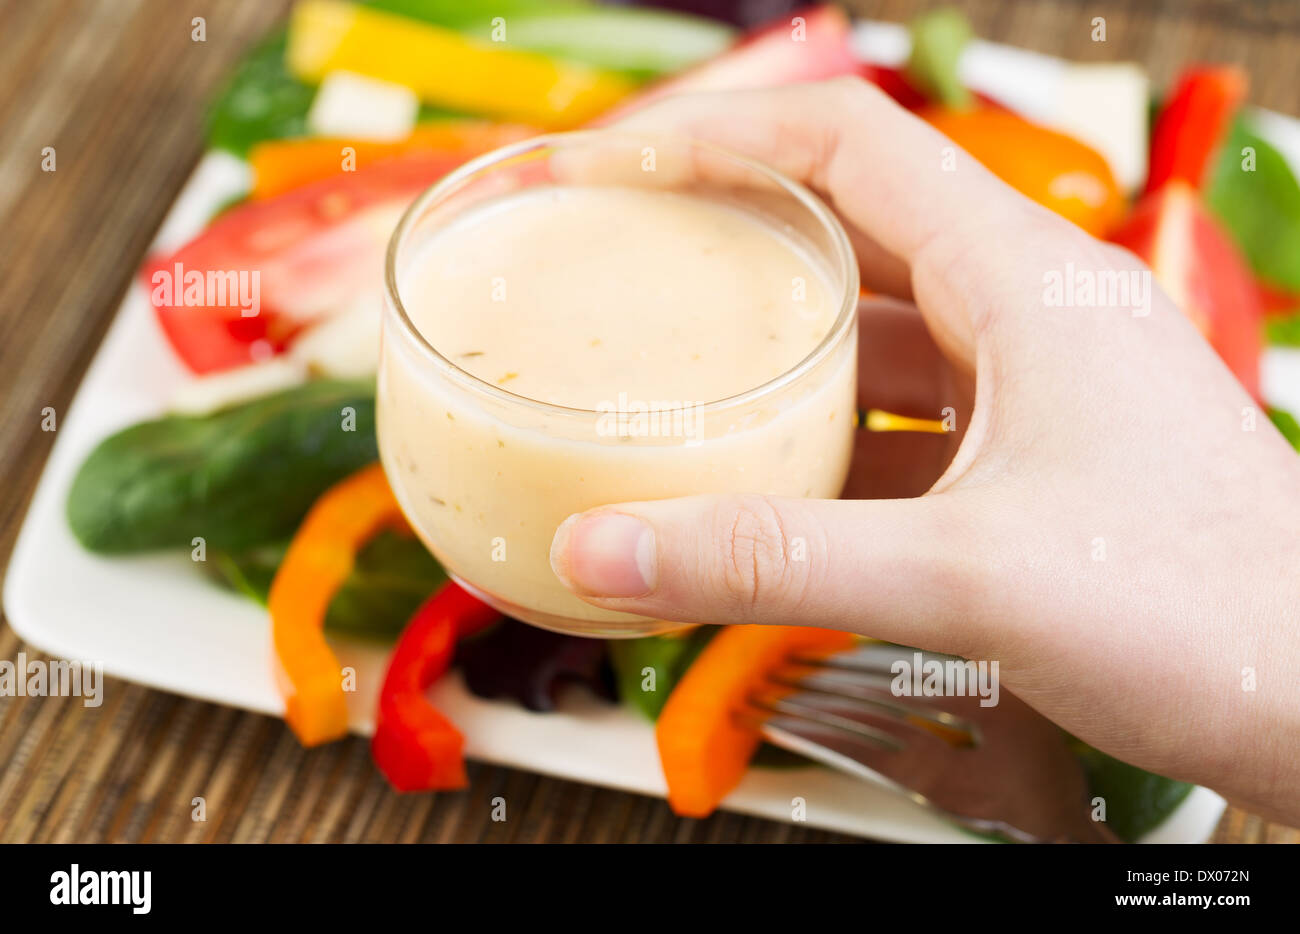 Horizontal photo of female hand holding dressing in small glass bowl with salad and plate in background Stock Photo